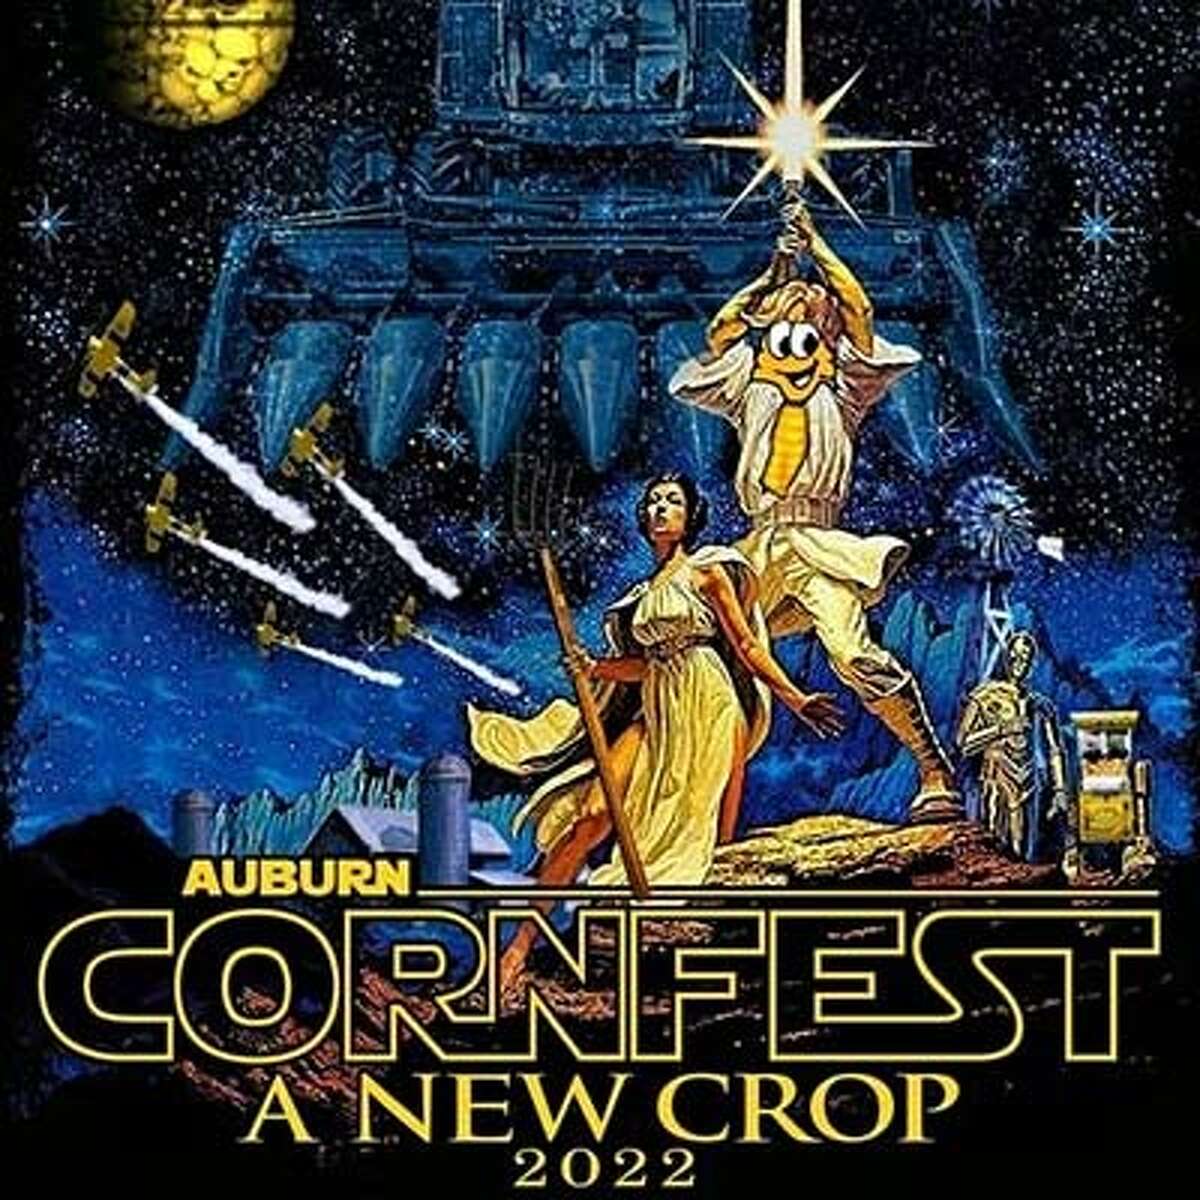 The 51st Auburn Cornfest takes place this Thursday through Sunday with a Star Wars-related theme.